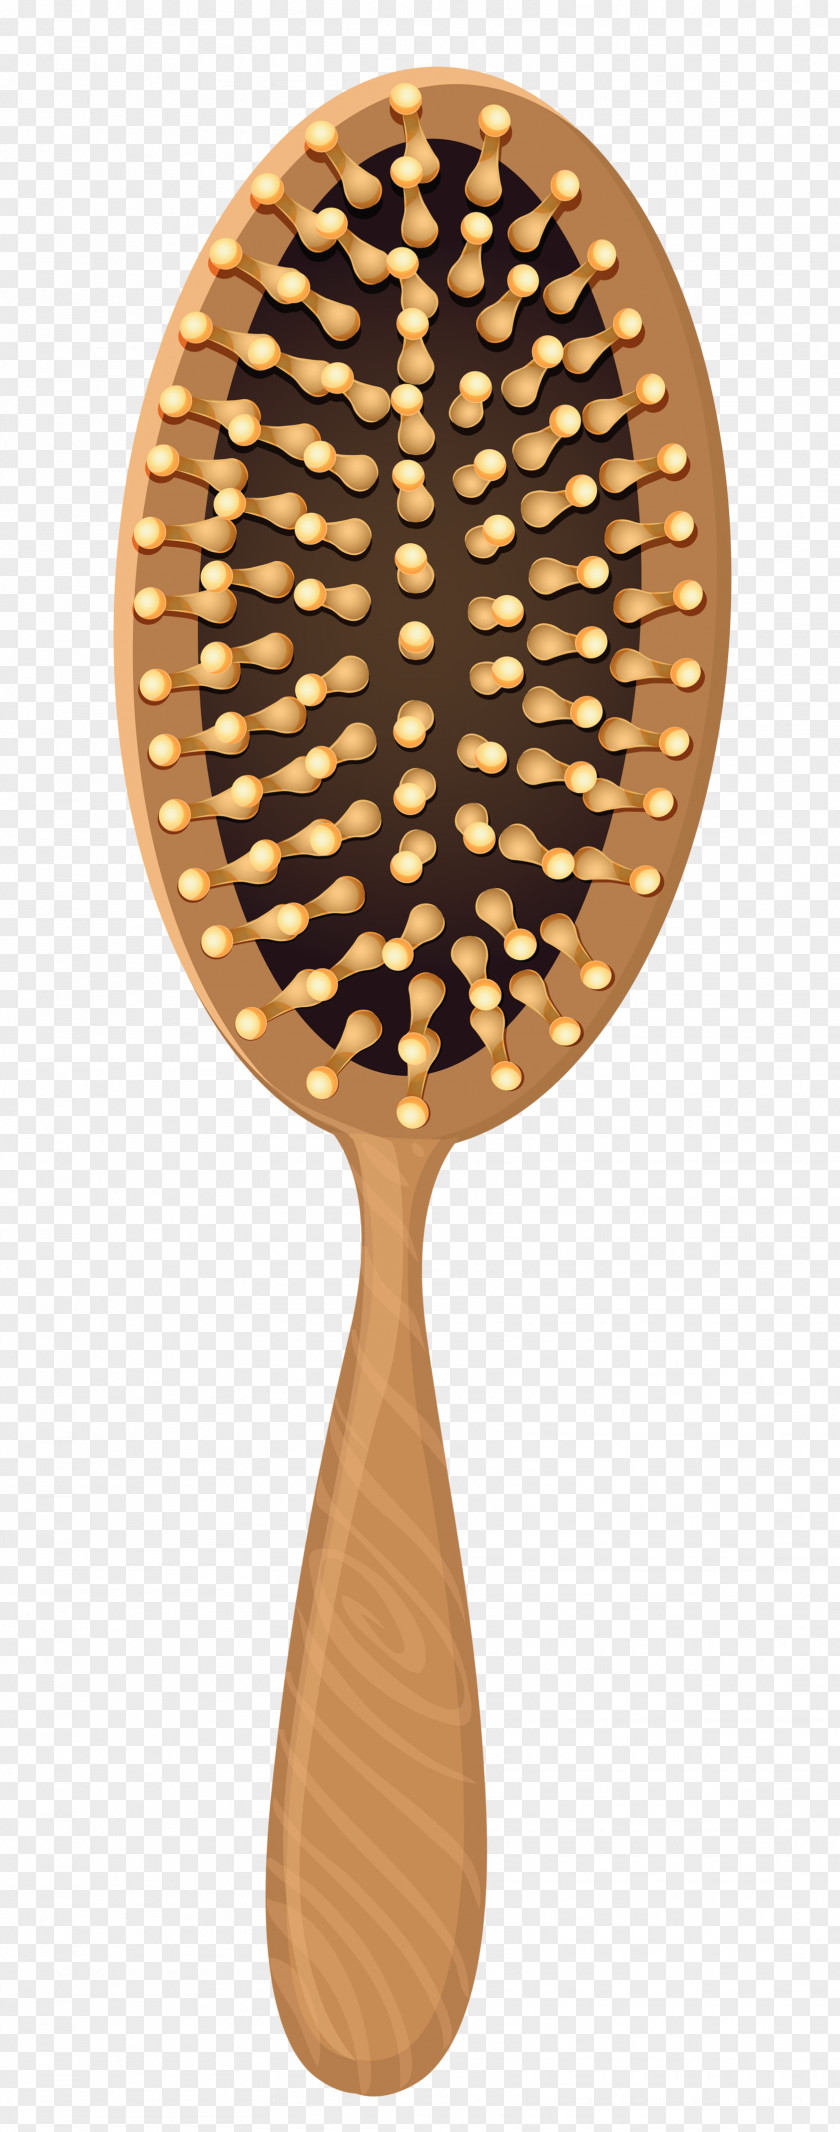 Brushes Comb Hair Clipper Hairbrush Dryers Clip Art PNG